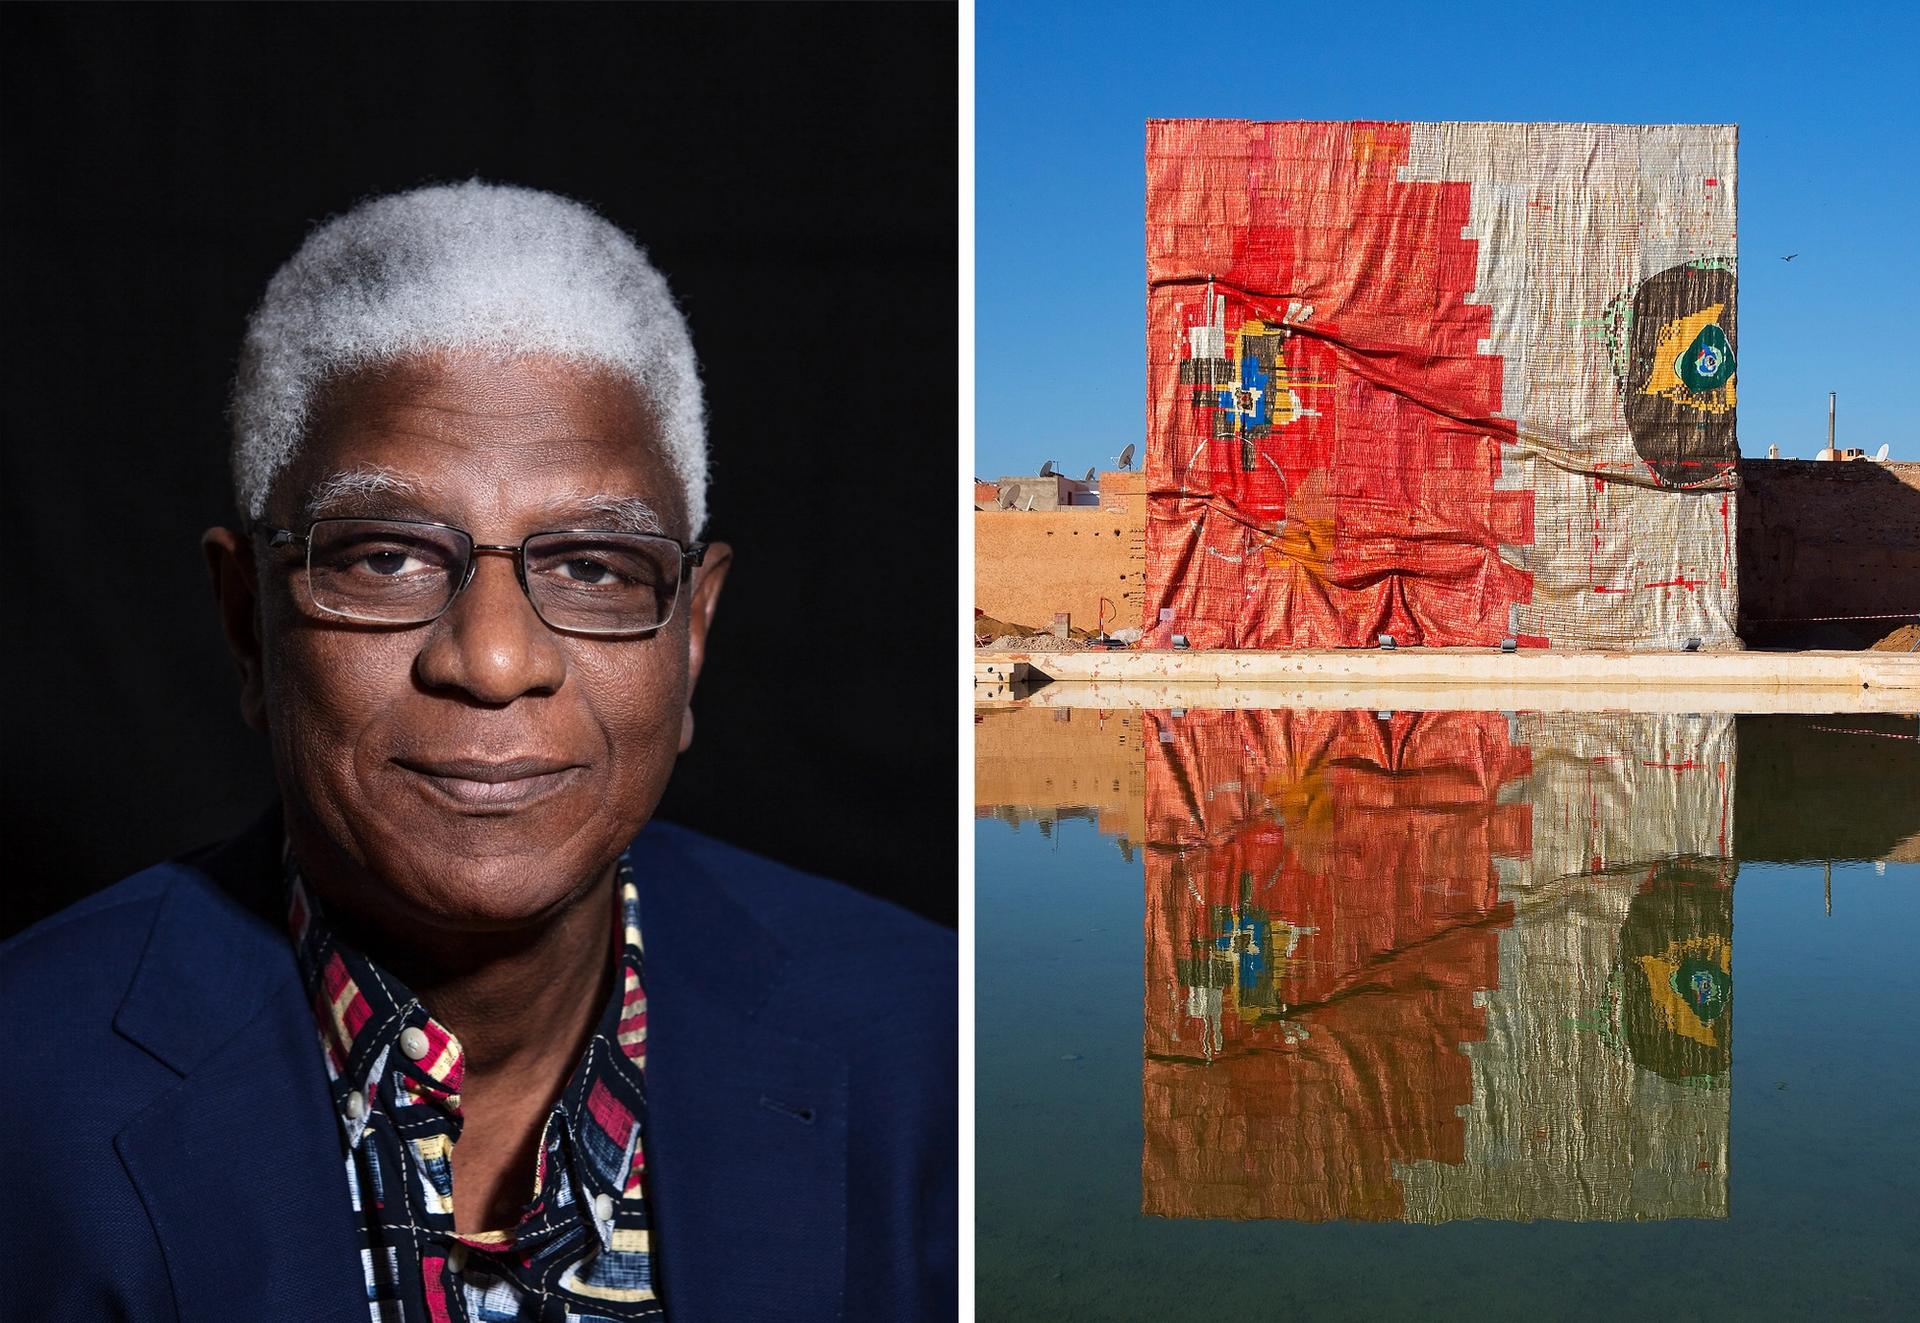 El Anatsui (left) is best known for his large-scale hanging 'tapestries' made of found objects such as bottle caps, as can be seen in his work Kindred Viewpoints (2016) which was part of Marrakech Biennale  Portrait photo: © Aliona Adrianova, 2019; courtesy of October Gallery, London. Kindred Viewpoints: Image courtesy Marrakech Biennale 6; Photo: © Jens Martin